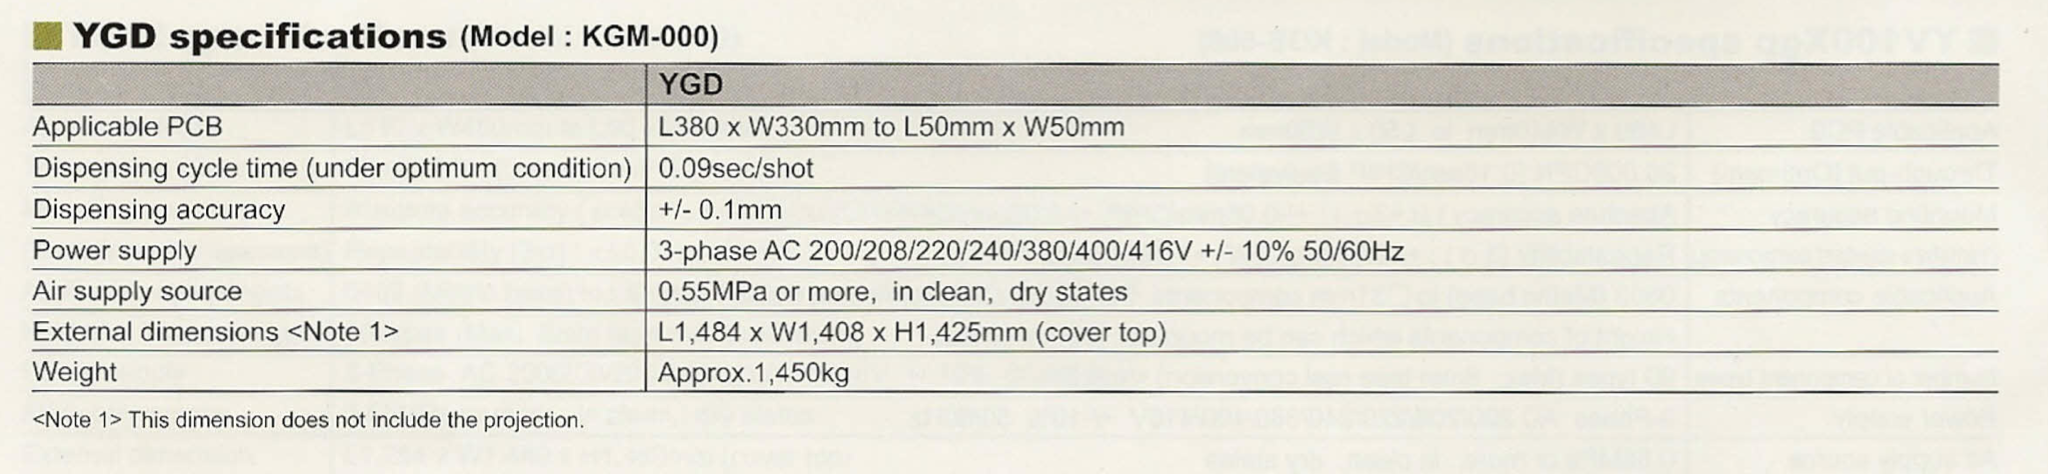 YGD specifications